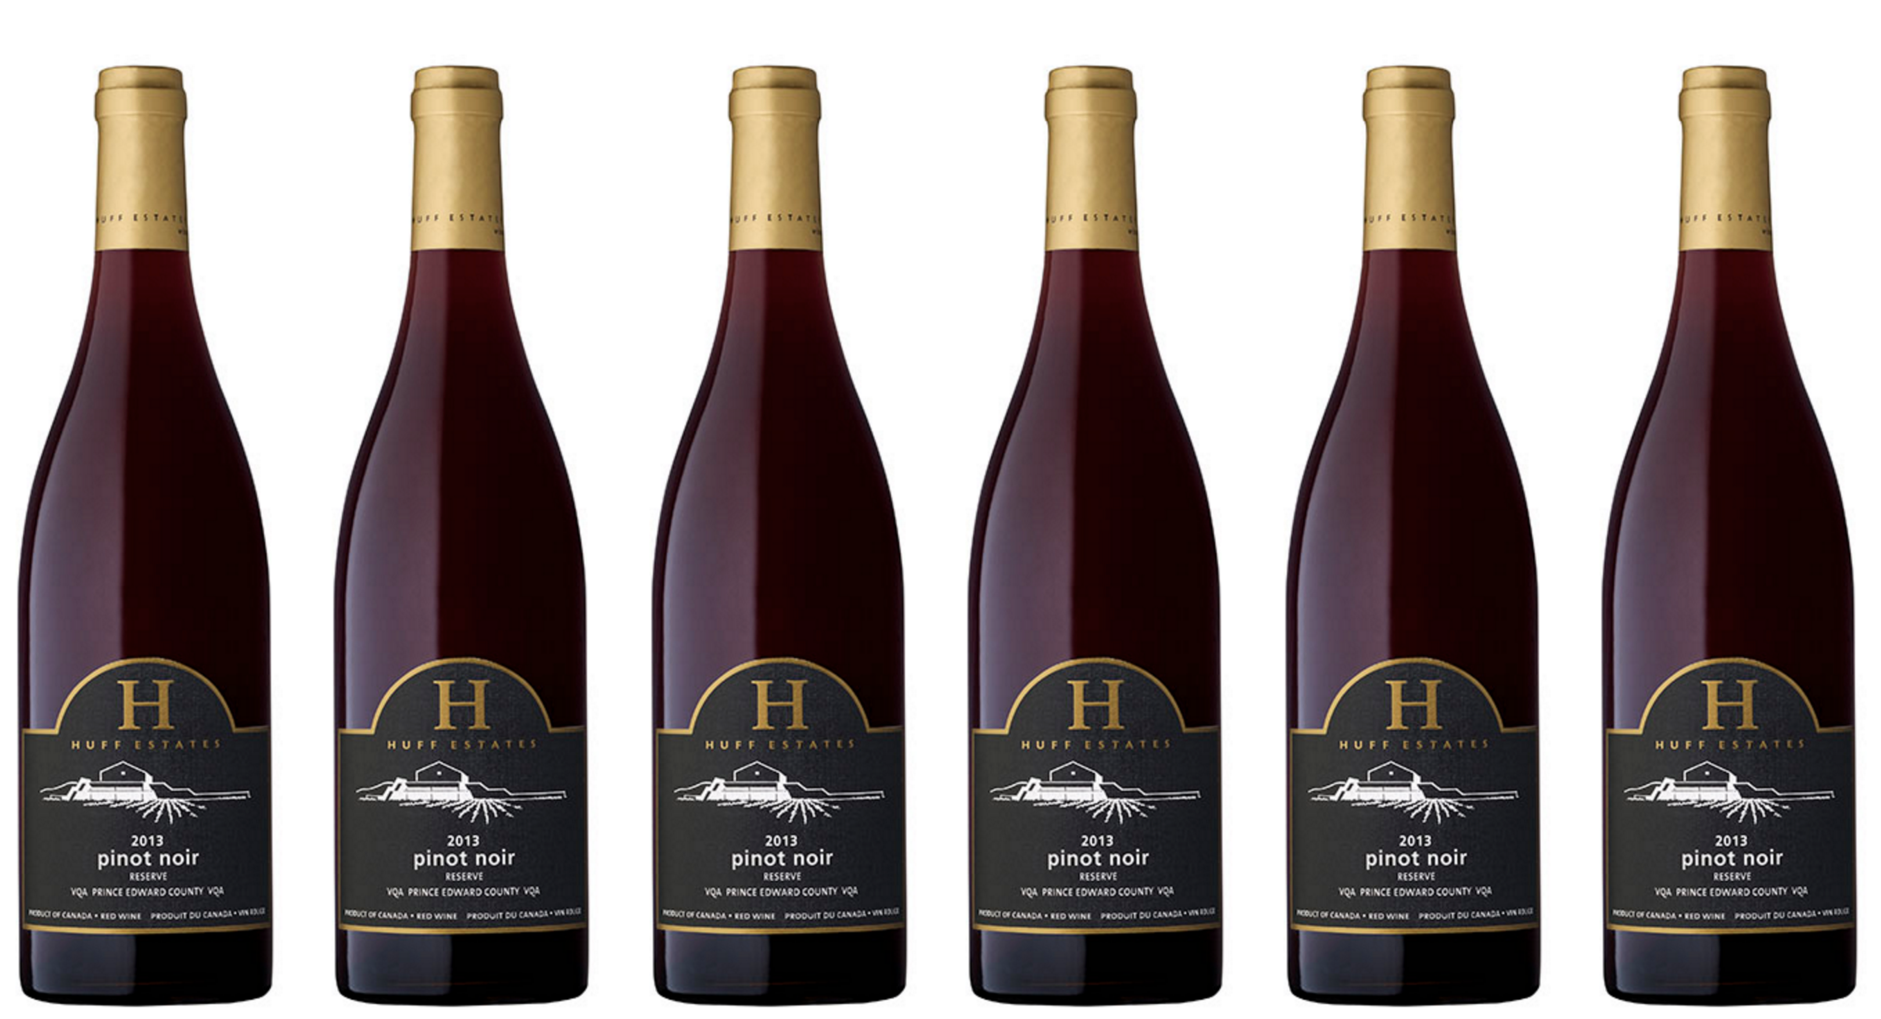 Try This : Huff Estates’ 2014 Pinot Noir Reserve